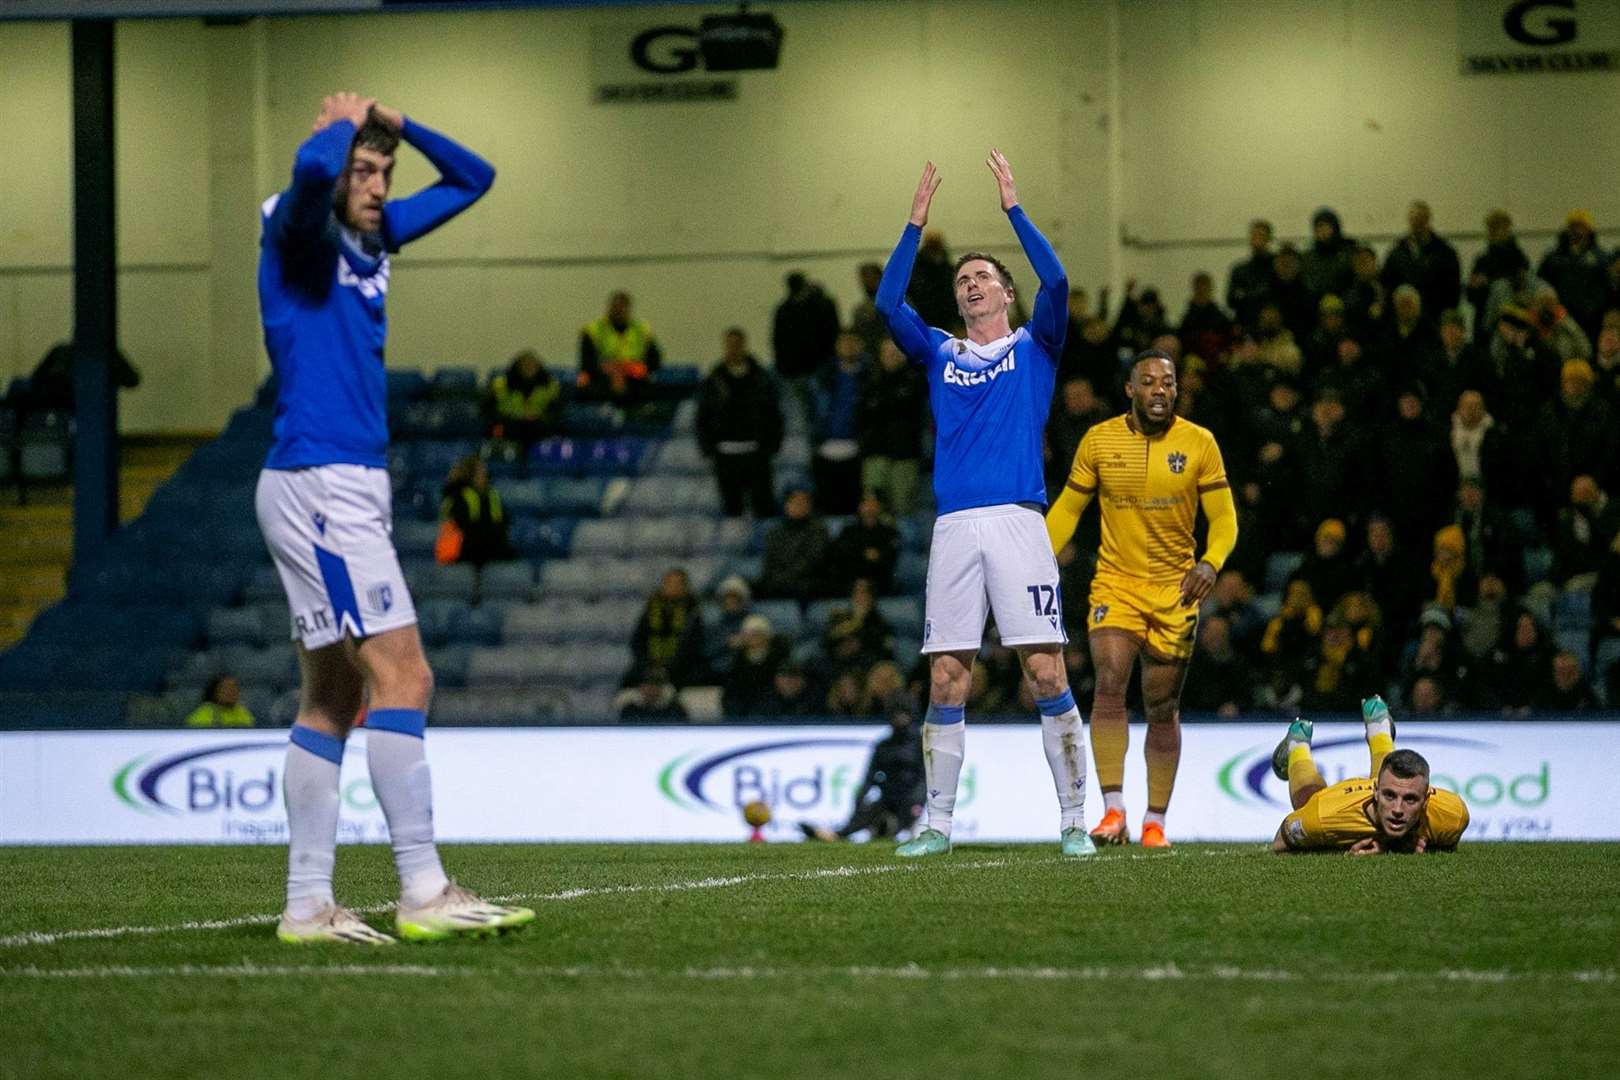 Another chance goes begging for Gillingham against Sutton United Picture: @Julian_KPI